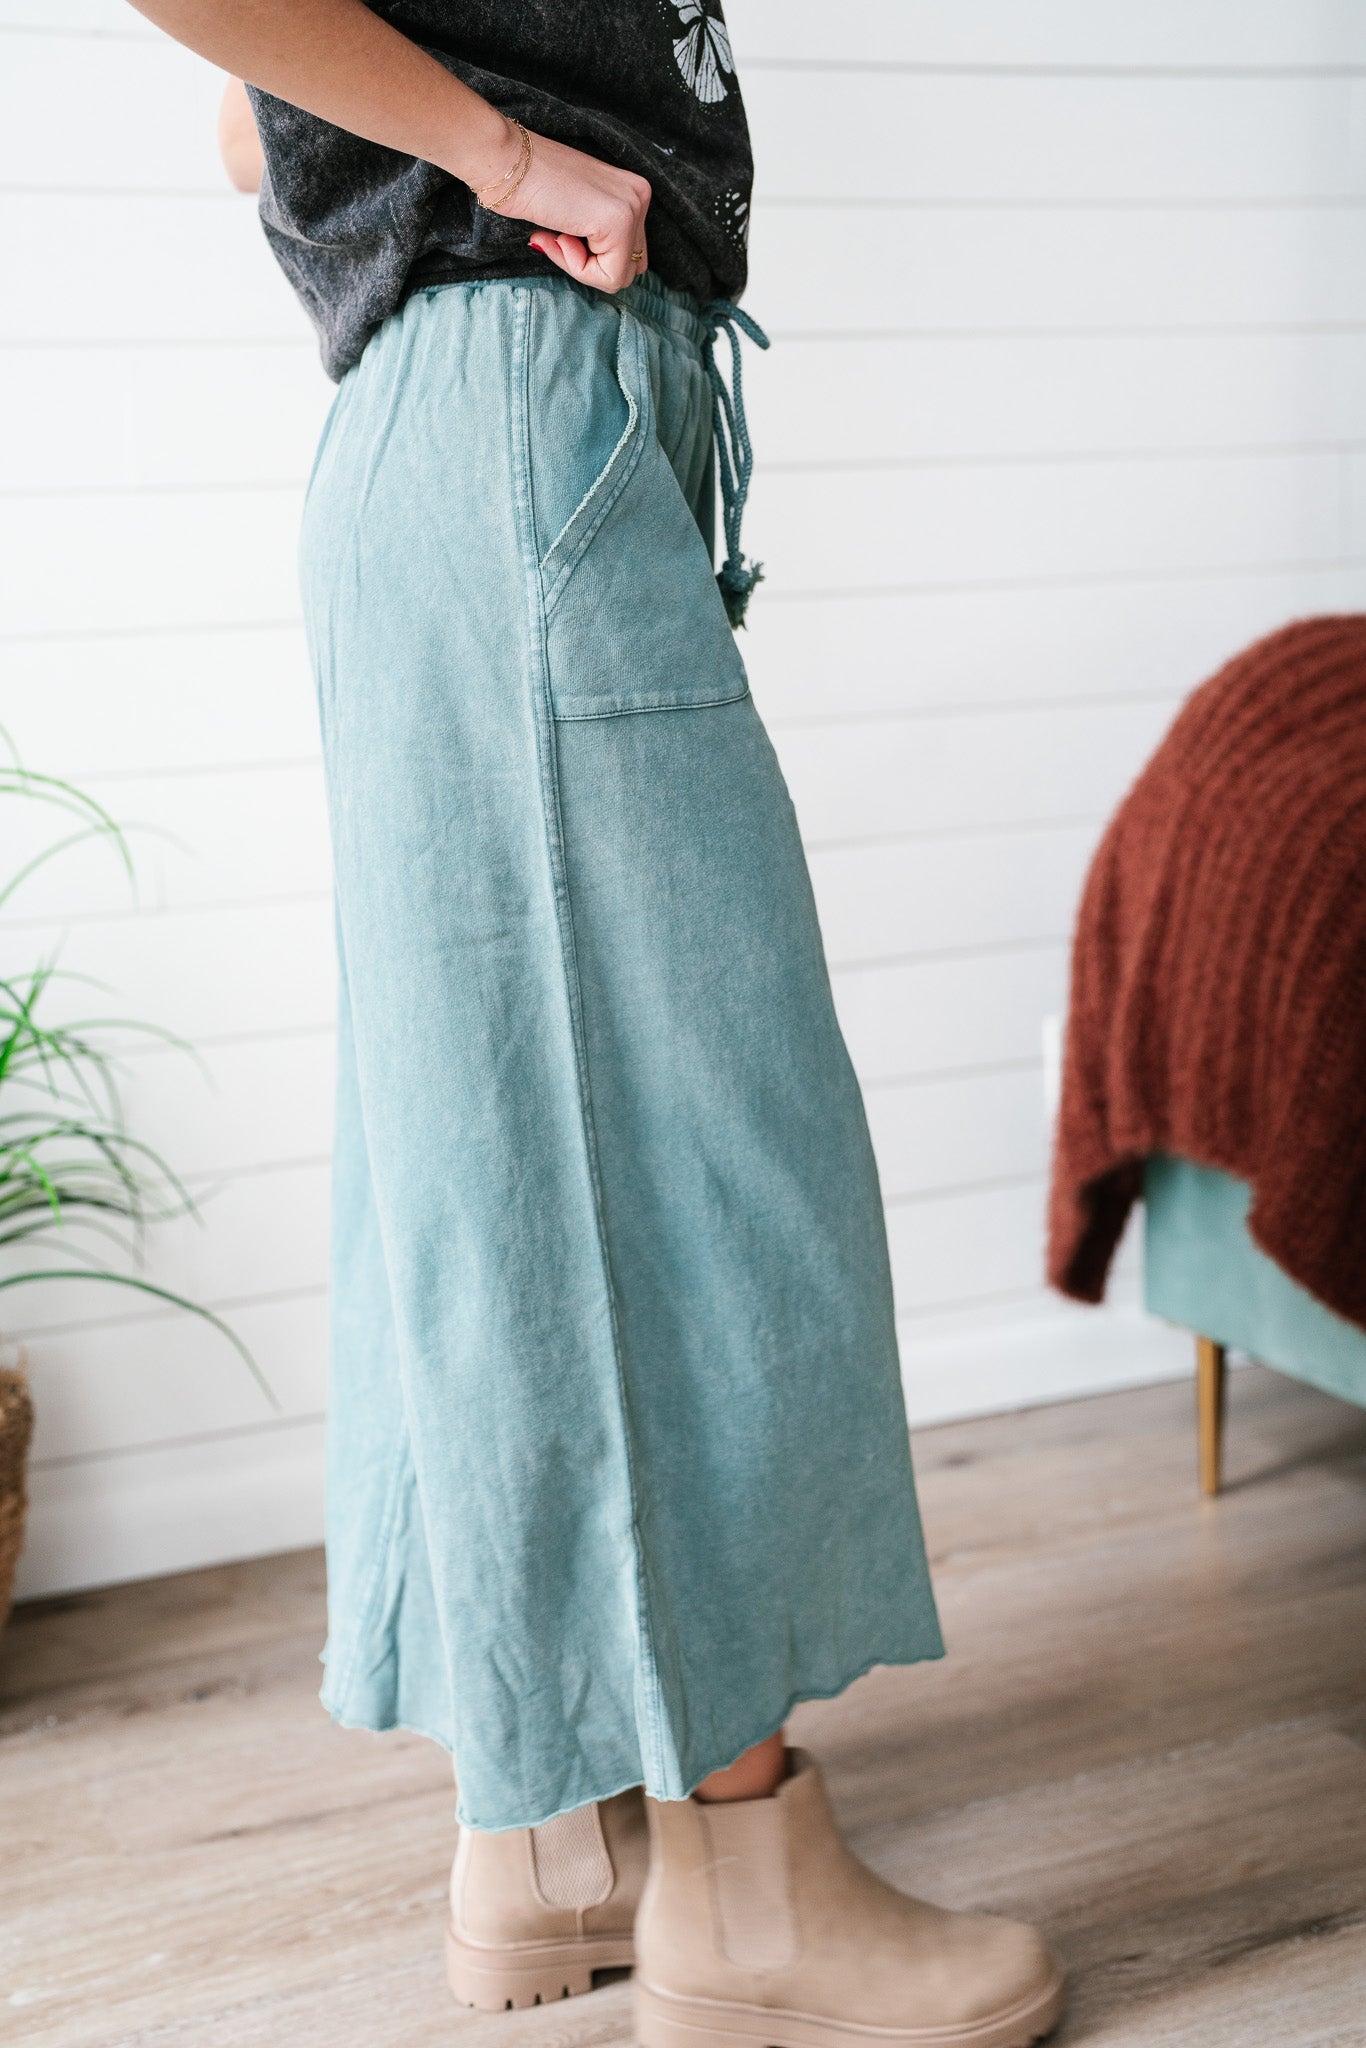 Can't Be Matched Mineral Wash Wide Leg Pants - Teal